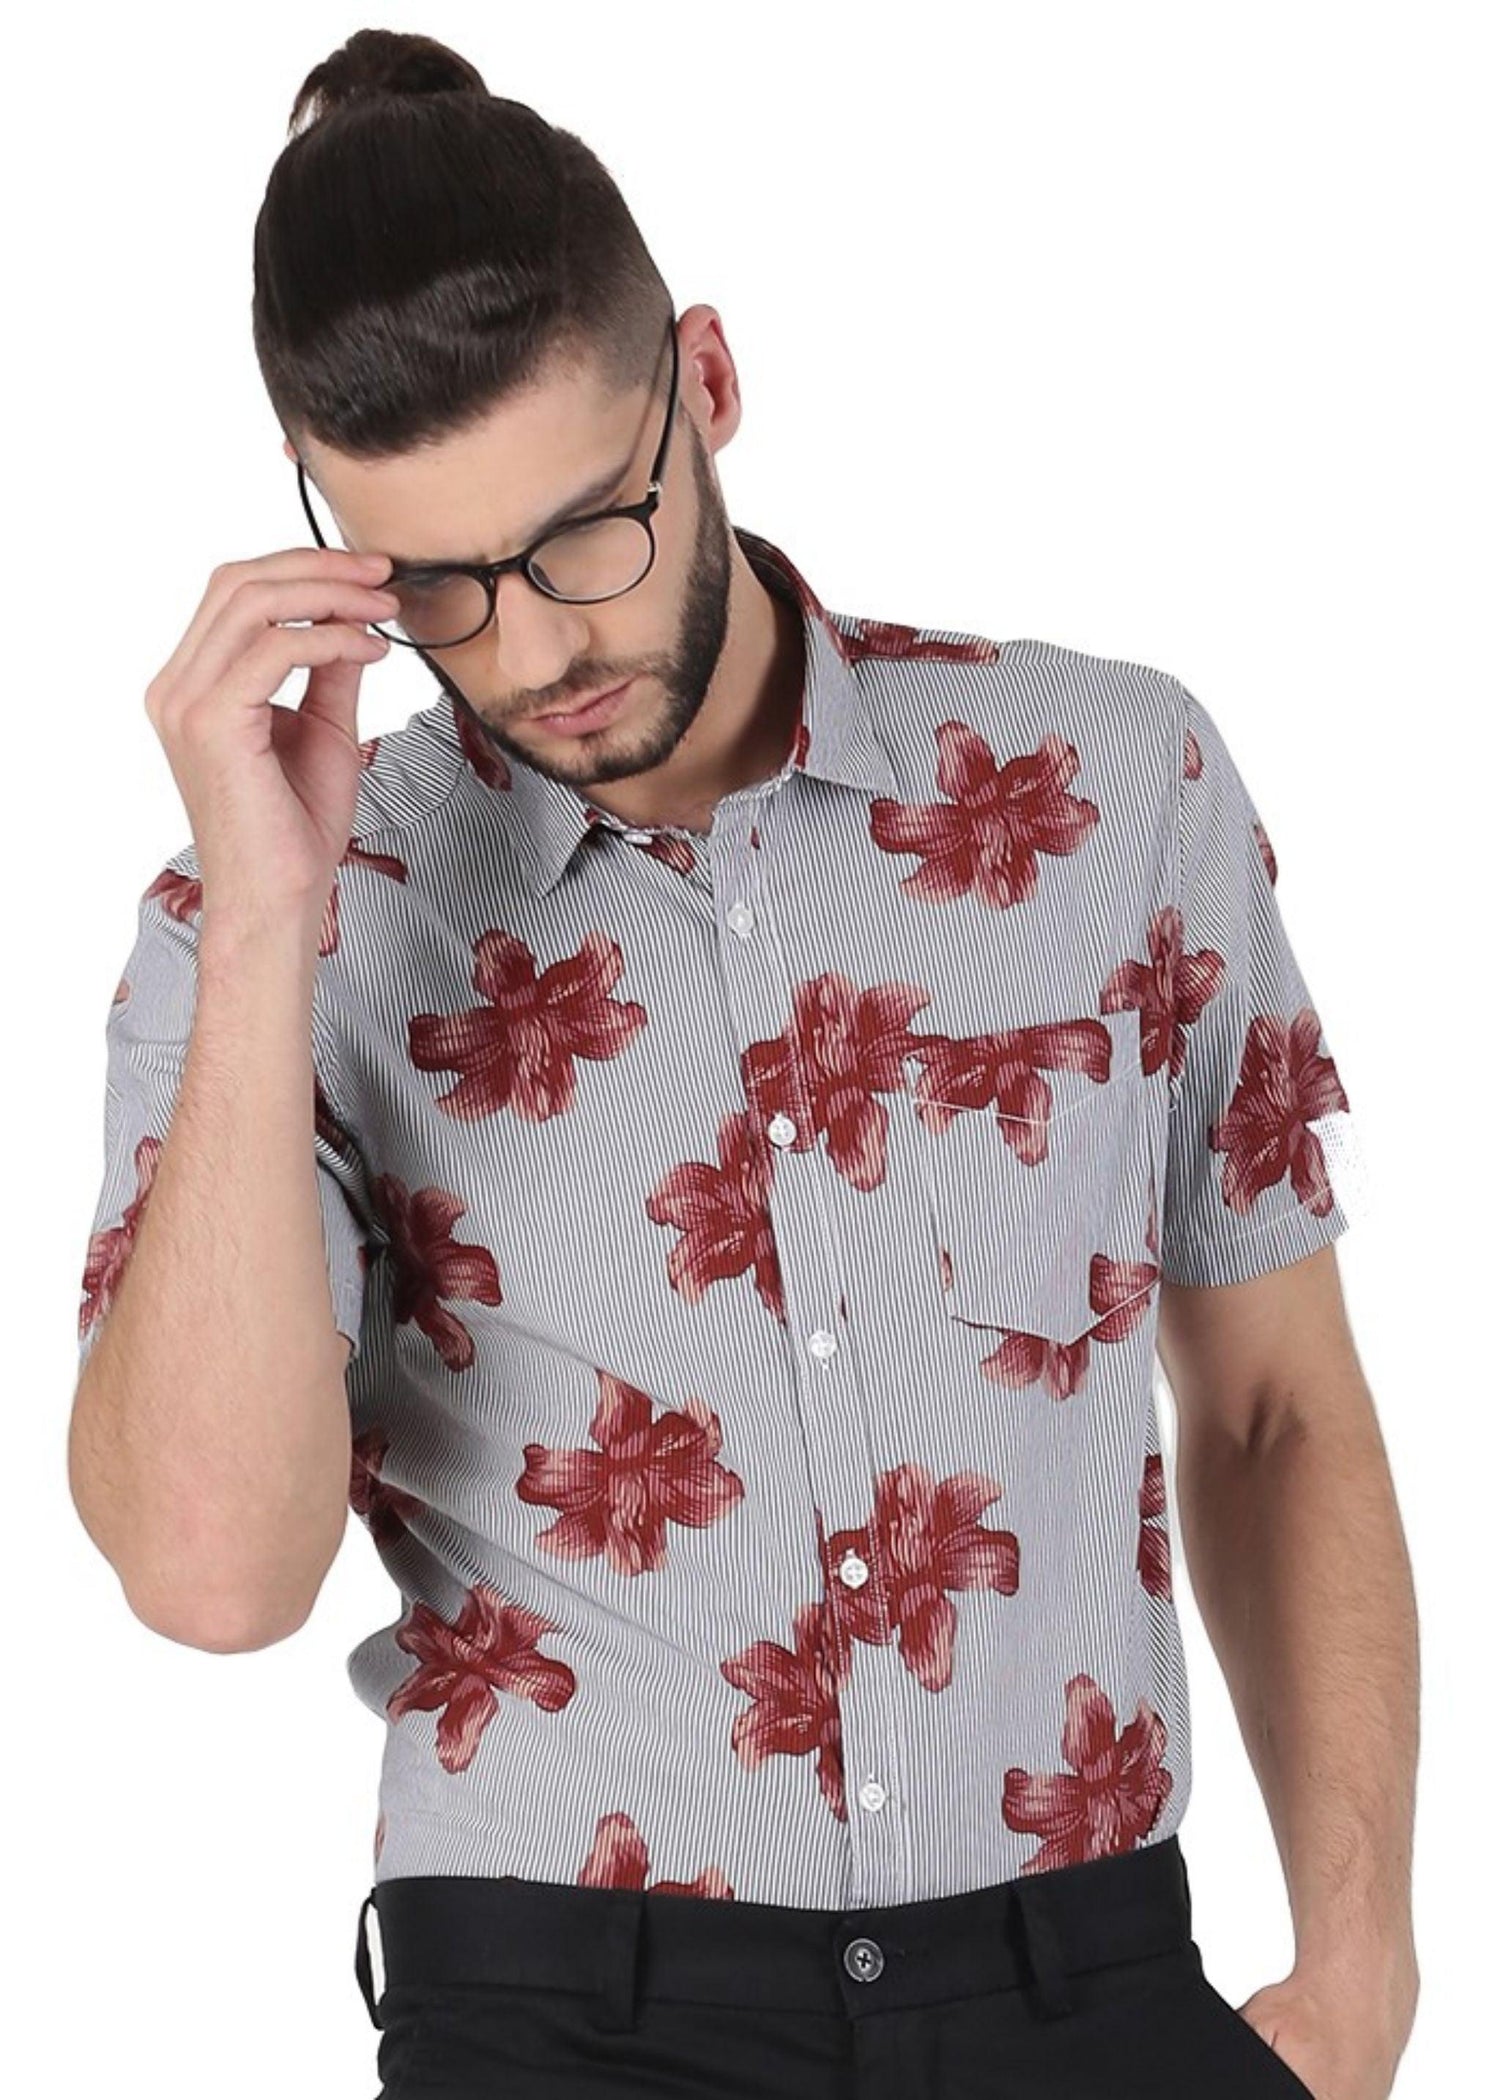 Tusok-brown-bloomFeatured Shirt, Vacation-Printed Shirtimage-Brown Bloom (1)